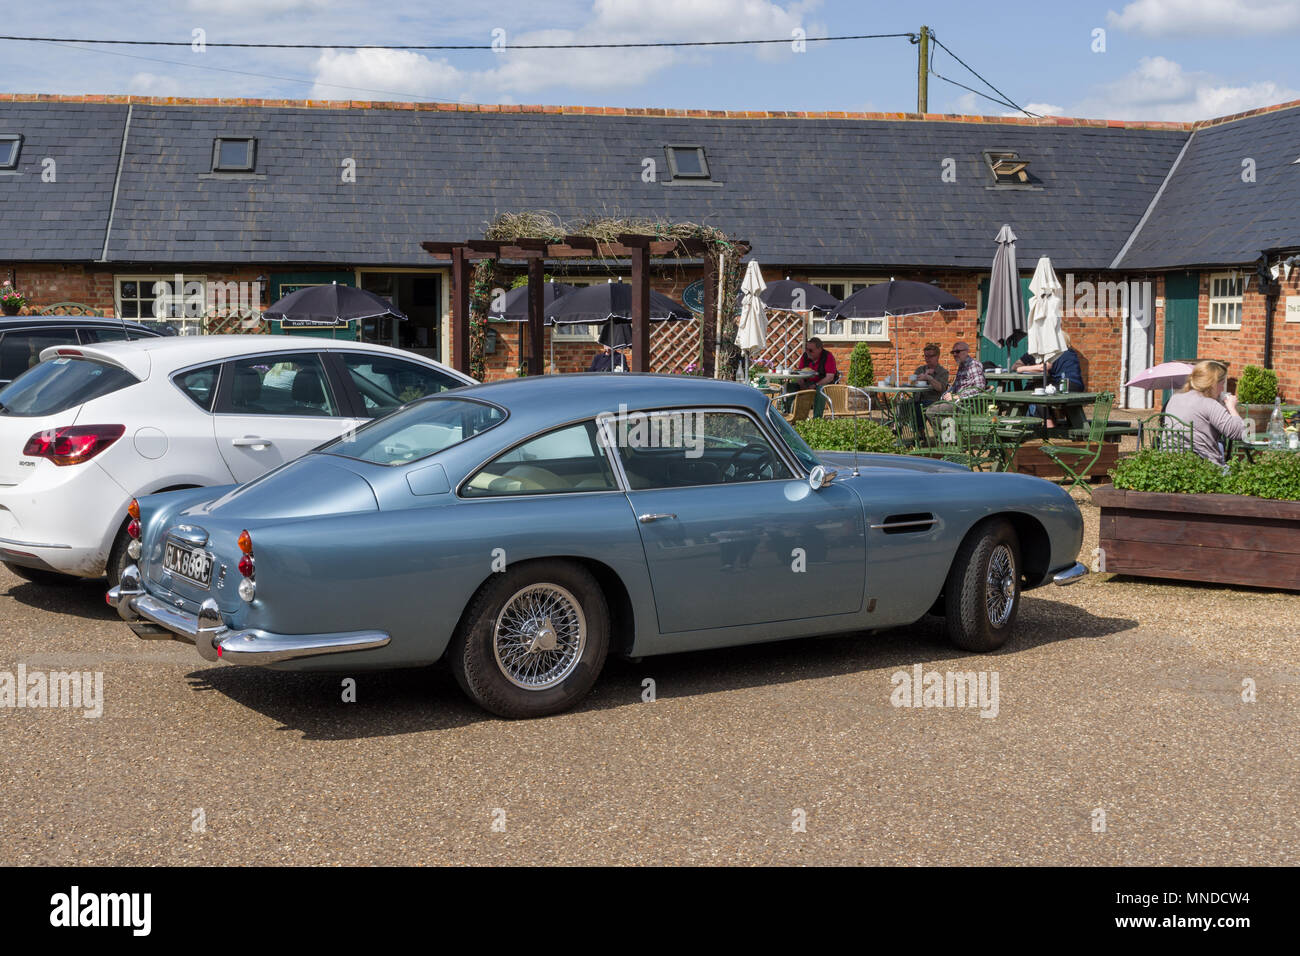 Aston Martin DB5 in light blue, a British design classic, perhaps best known for it's James Bond connection. Stock Photo